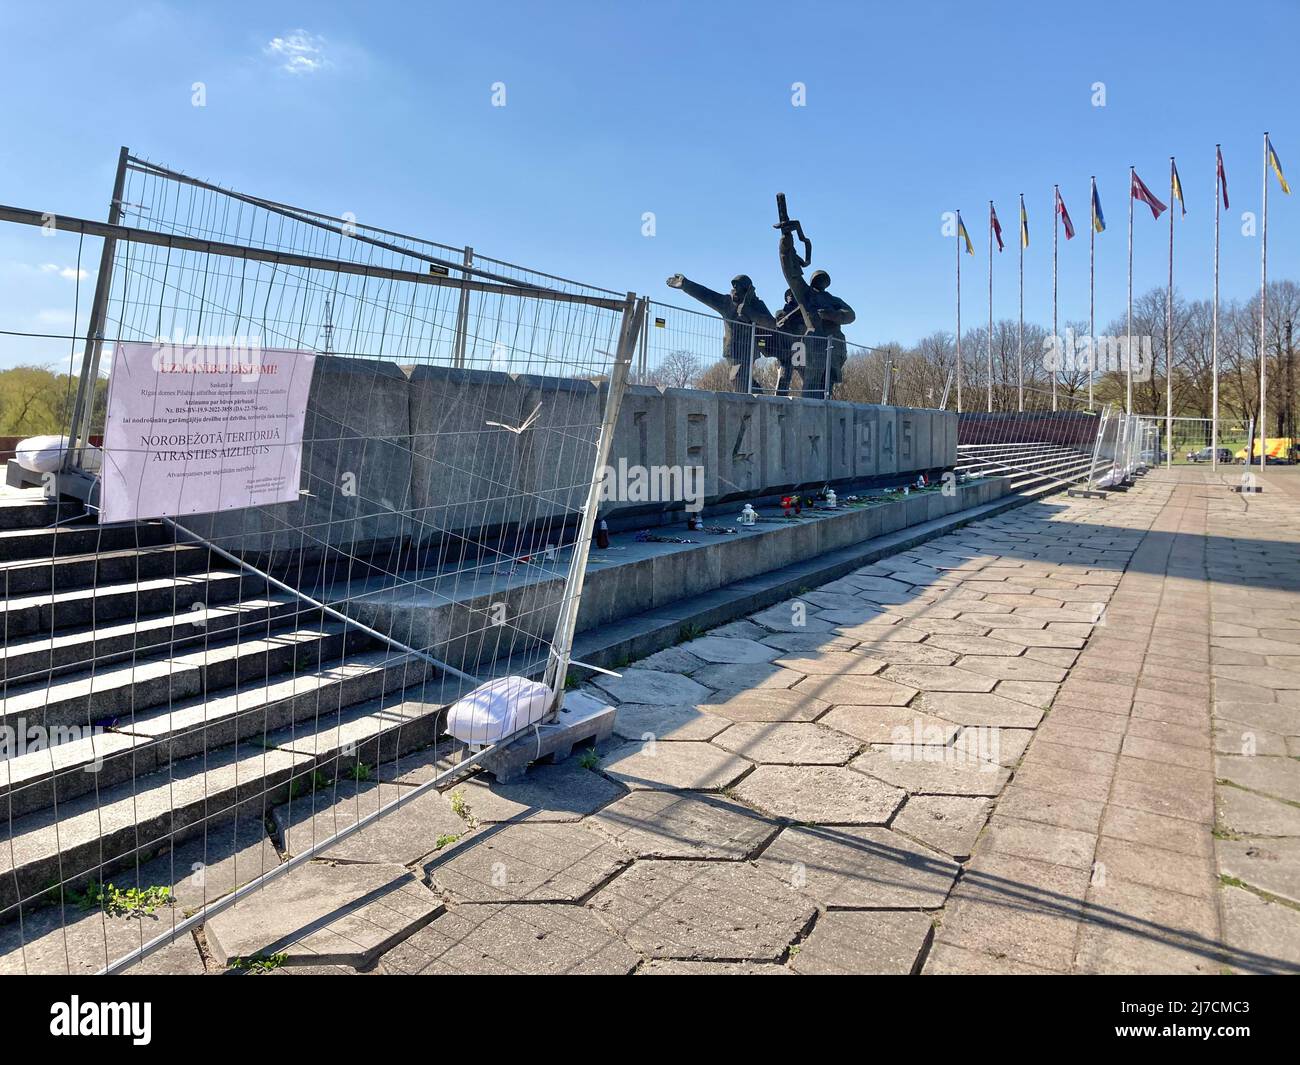 06 May 2022, Latvia, Riga: Signs at the Victory Monument indicate that it is closed off because of its technical condition. In the Latvian capital Riga, an exhibition of war photos from Ukraine was opened shortly before the Russian 'Victory Day' on May 9. Photo: Alexander Welscher/dpa Stock Photo